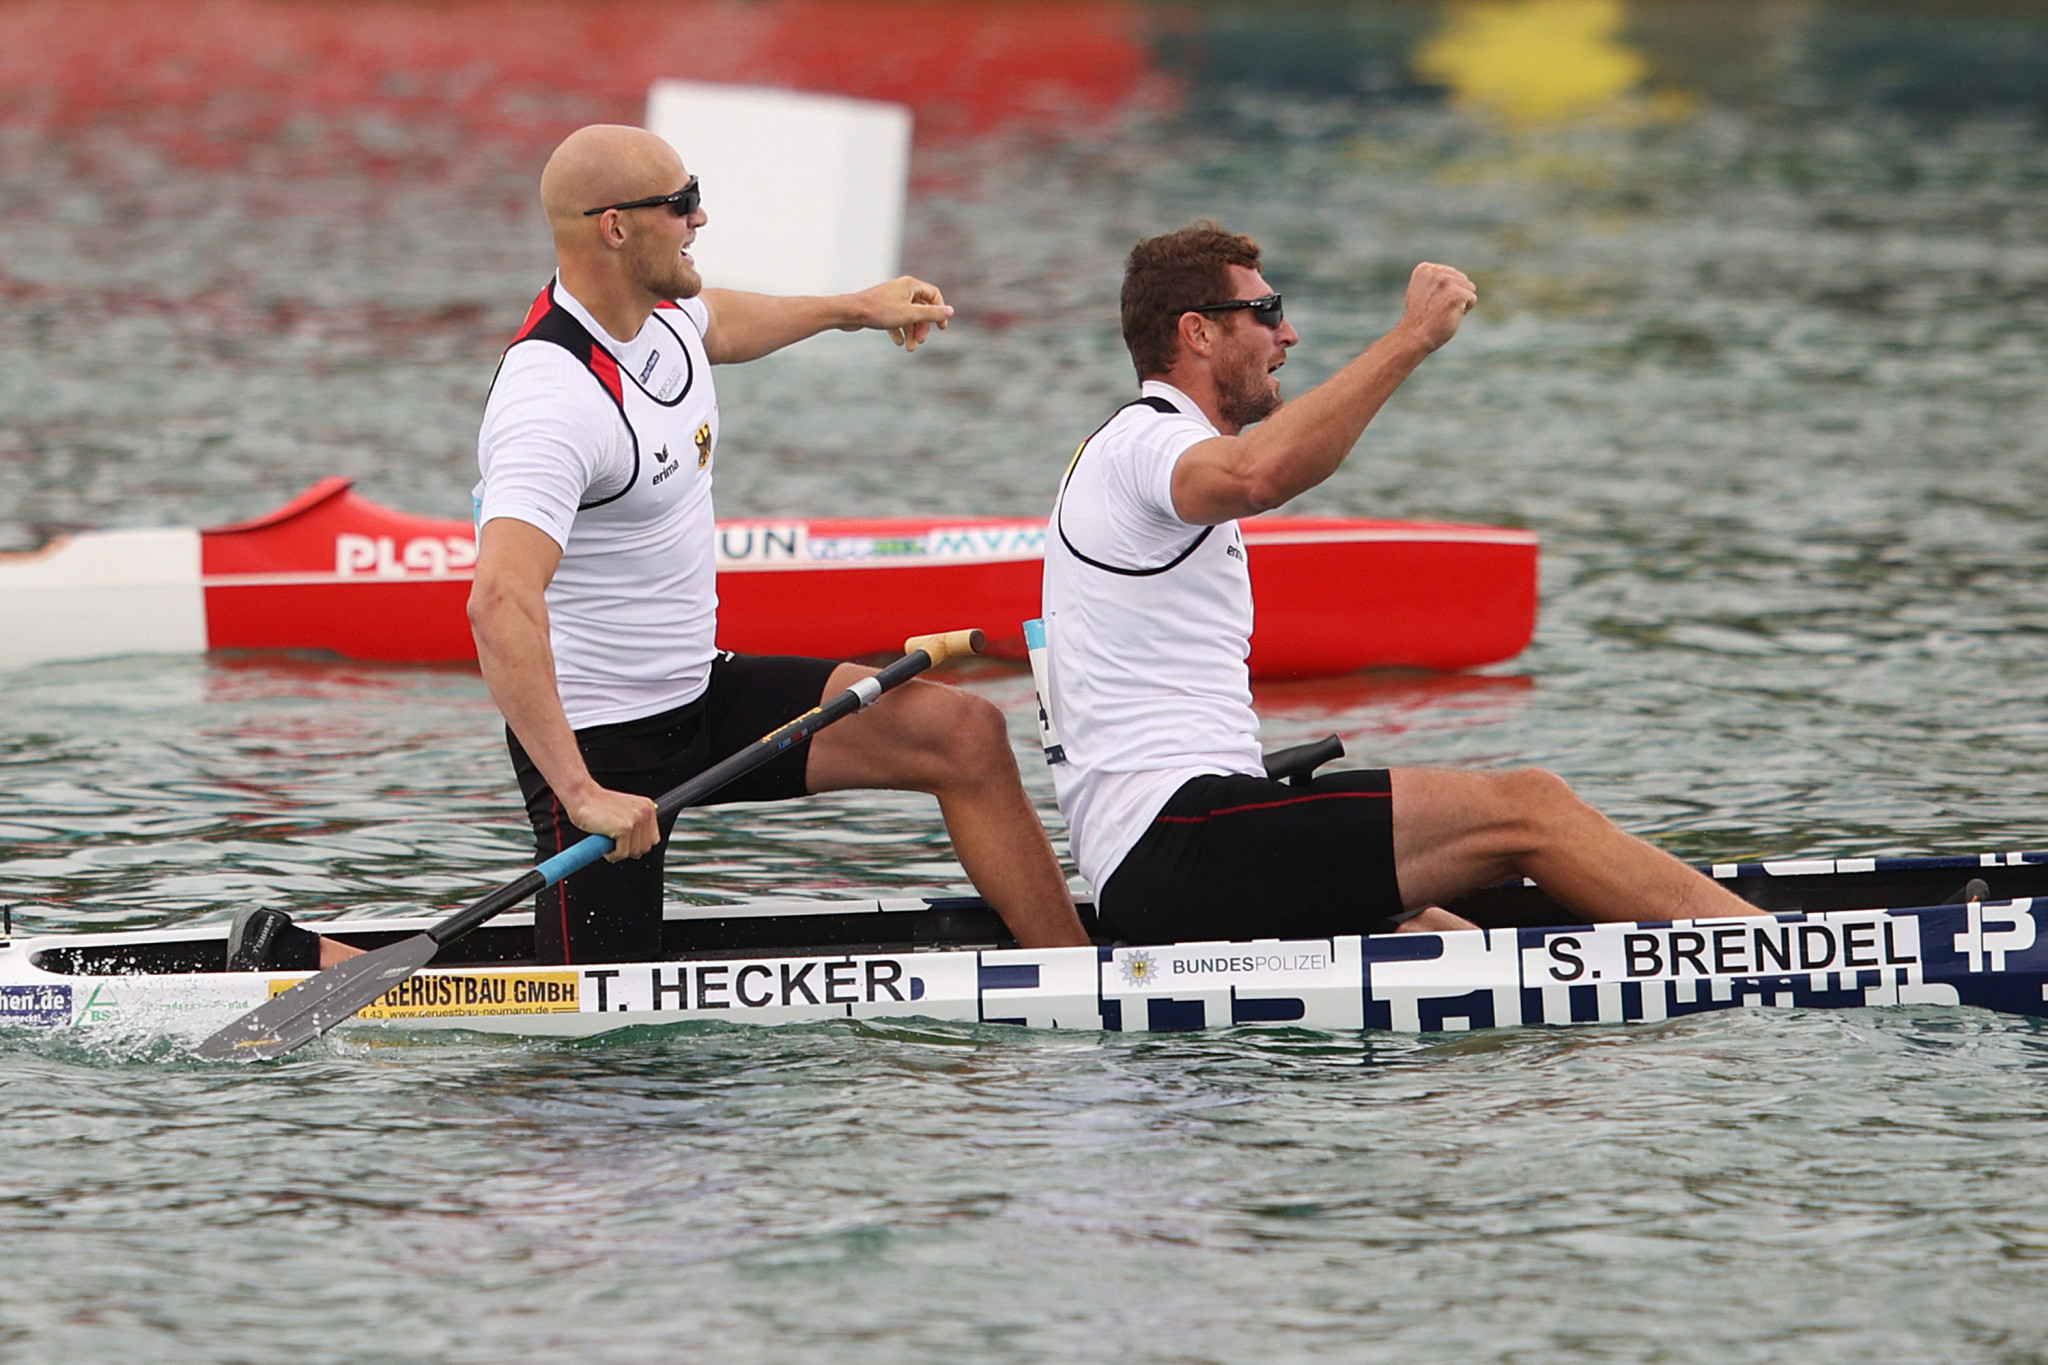 Germany and Britain enjoy promising first day of canoe sprint finals at Munich 2022